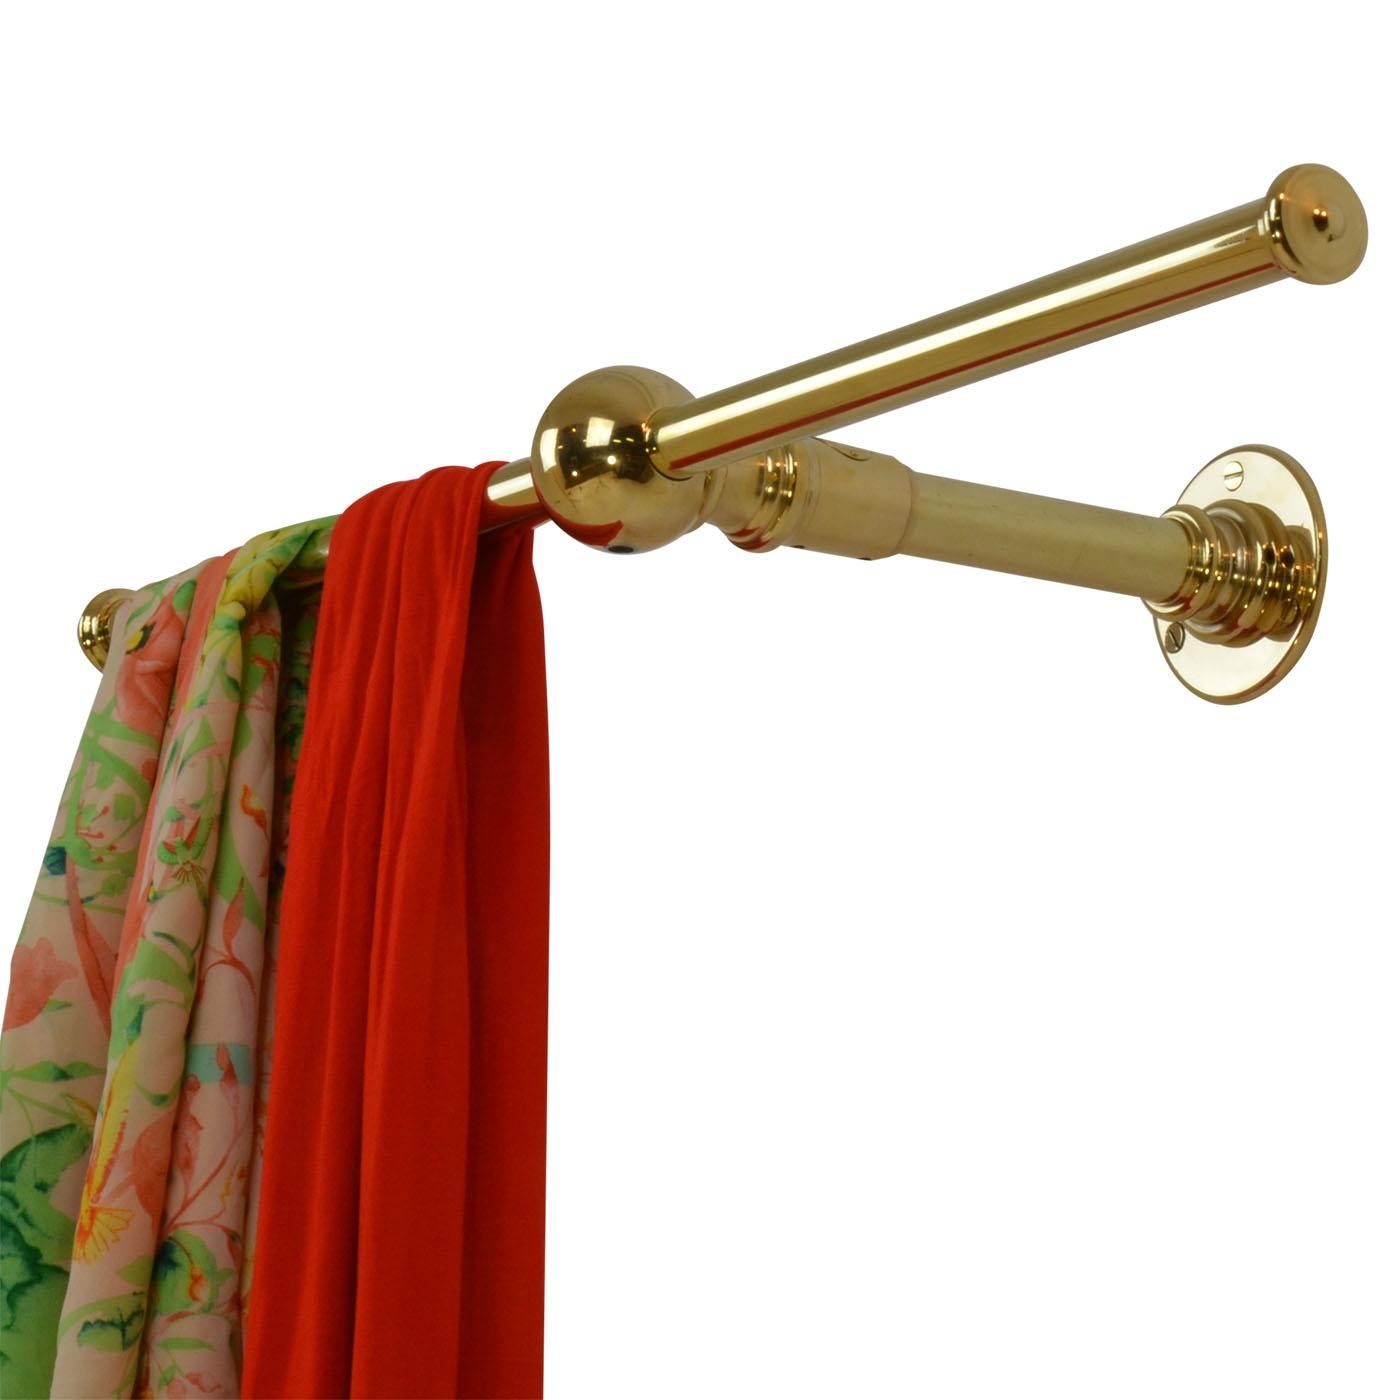 The Canterbury, an Andrew Nebbett Designs wall mounted clothes rail in solid brass. This Canterbury clothes rail is tailor-made to order and is handmade, colored, patinated and finished in our English workshops from the finest quality